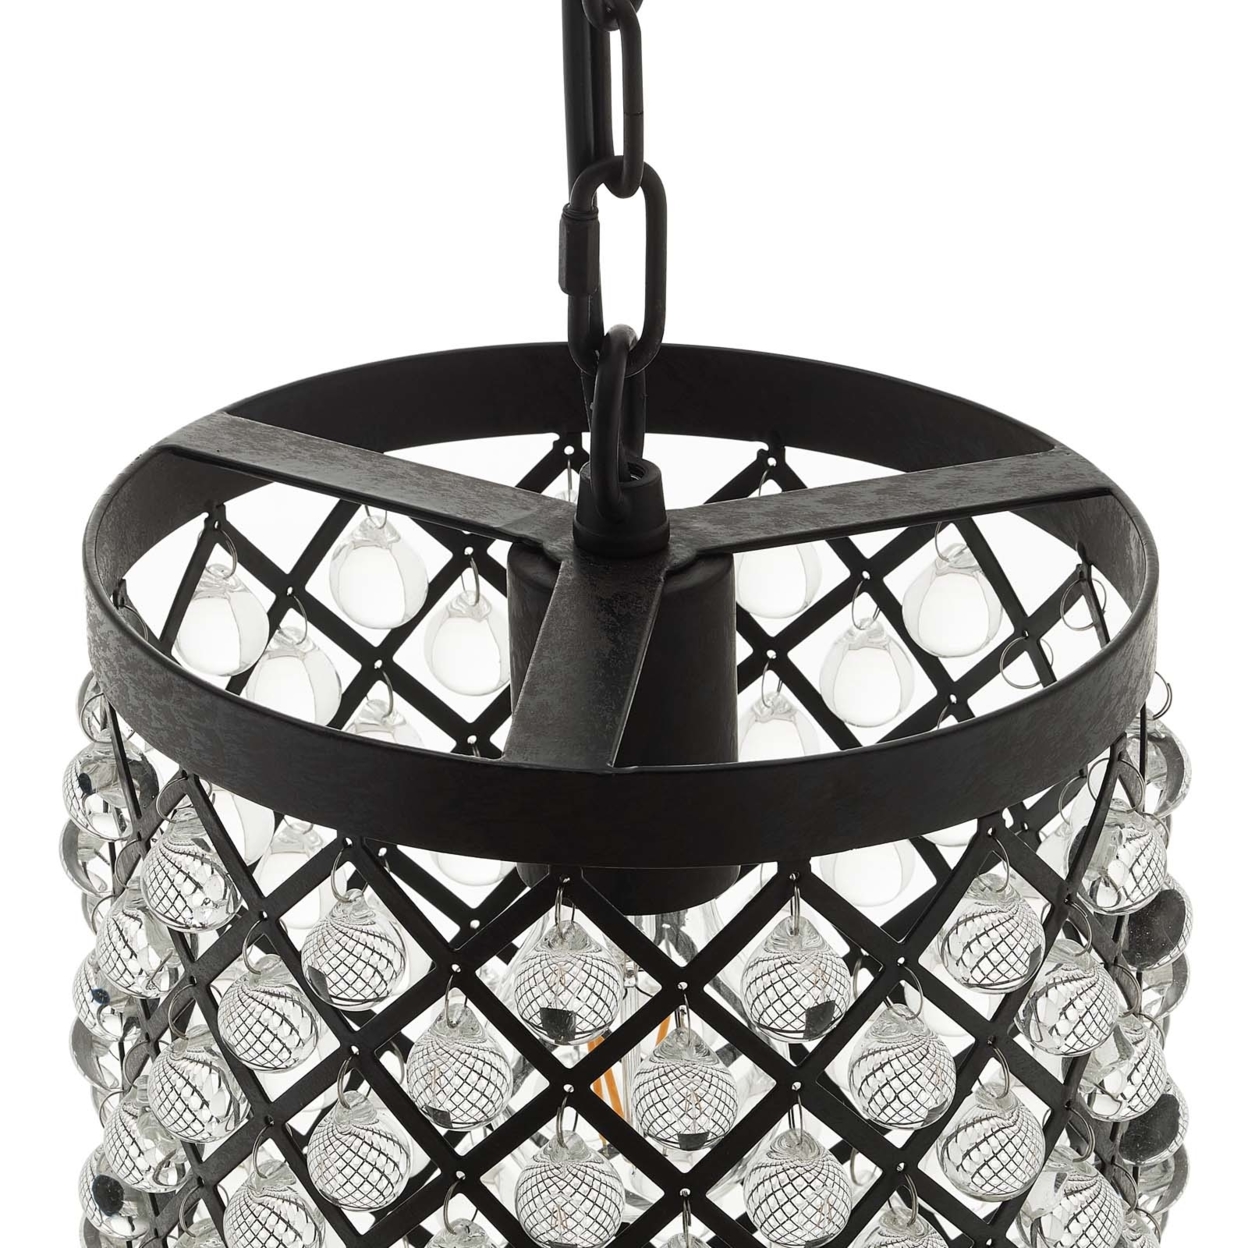 Reflect Glass And Metal Pendant Chandelier (2887)